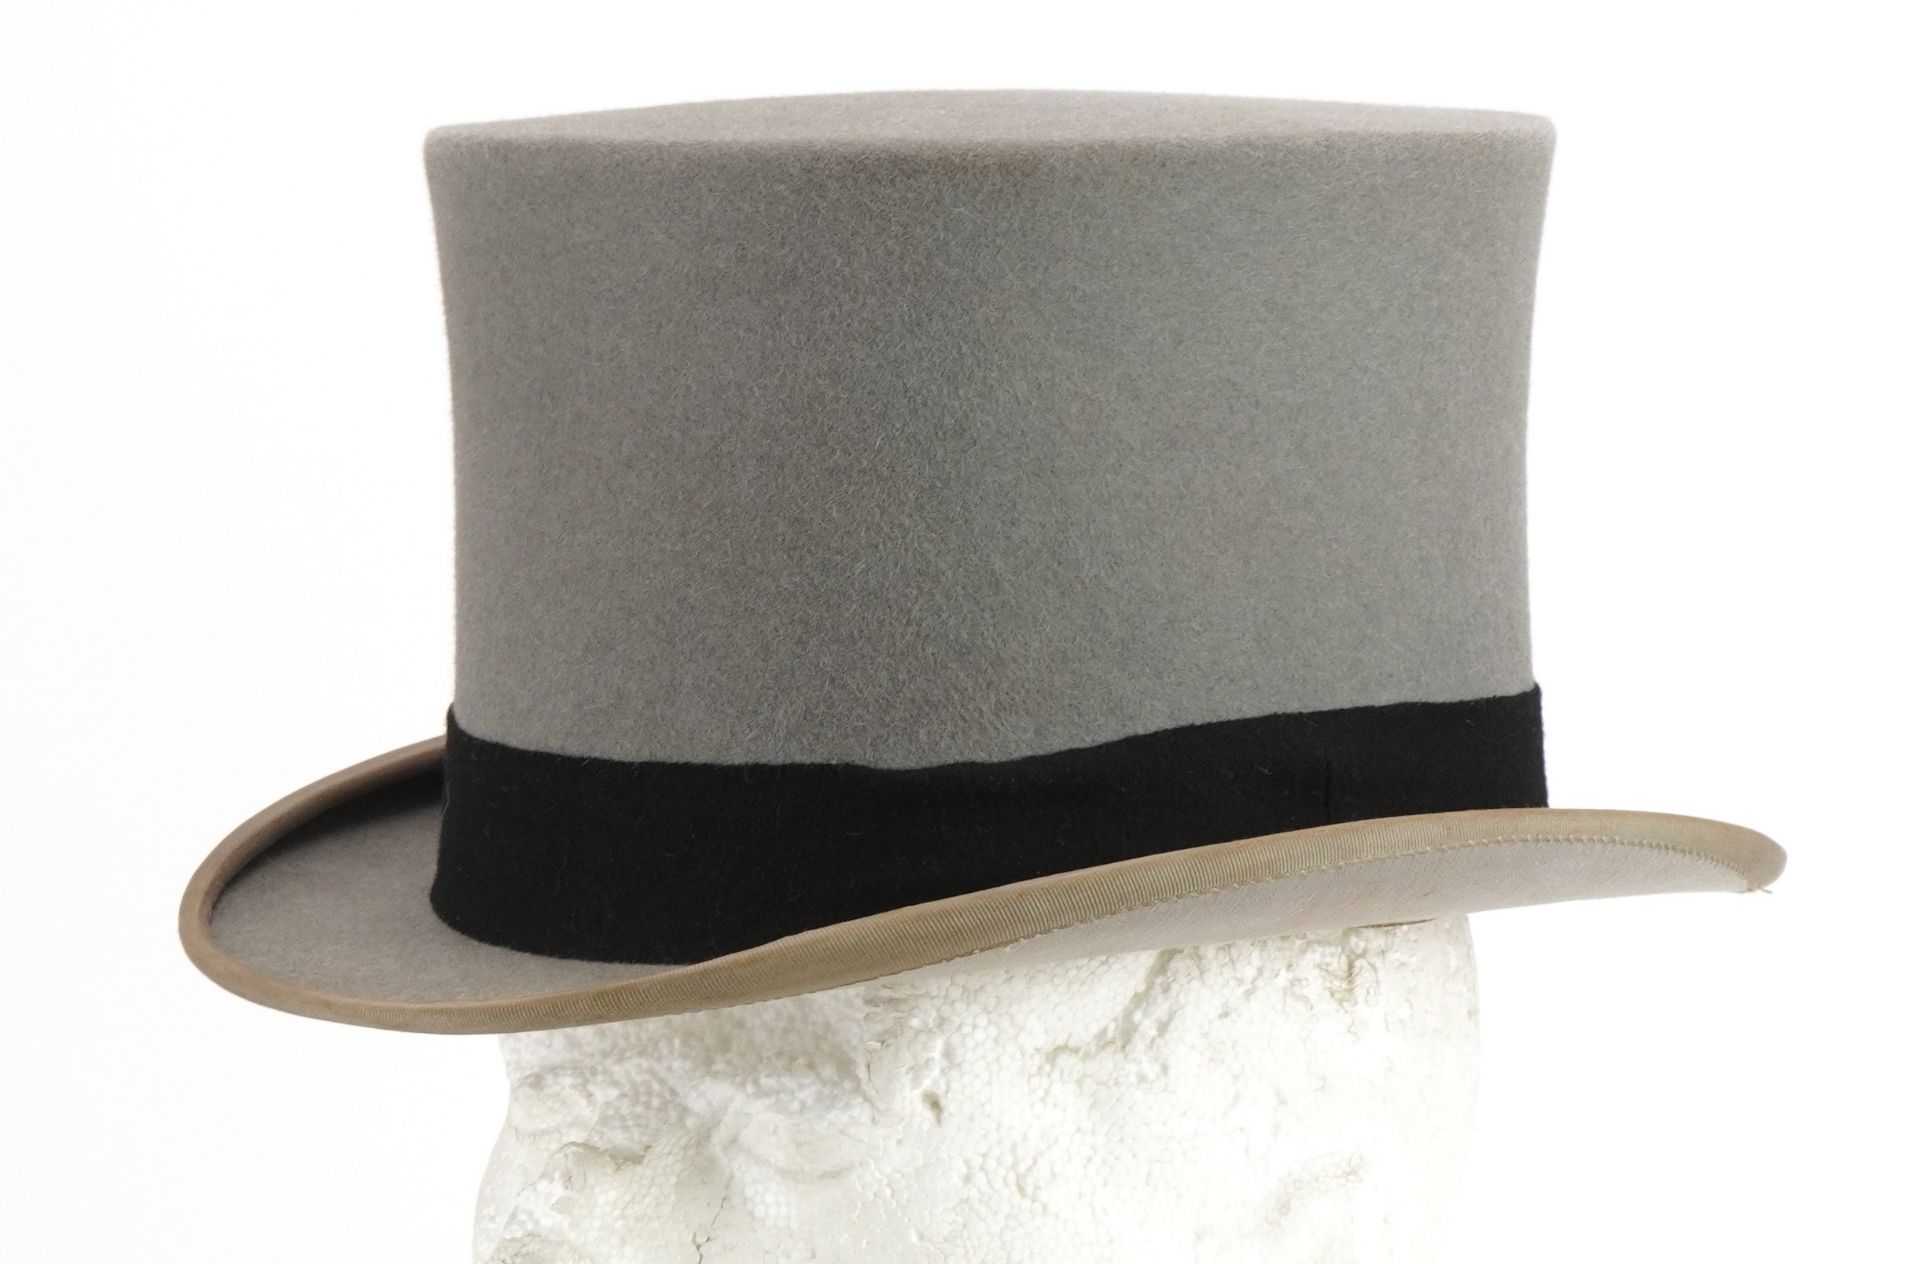 Scott & Co top hat housed in a brown leatherette travel box, the top hat interior size 21cm x 17cm : - Bild 7 aus 7